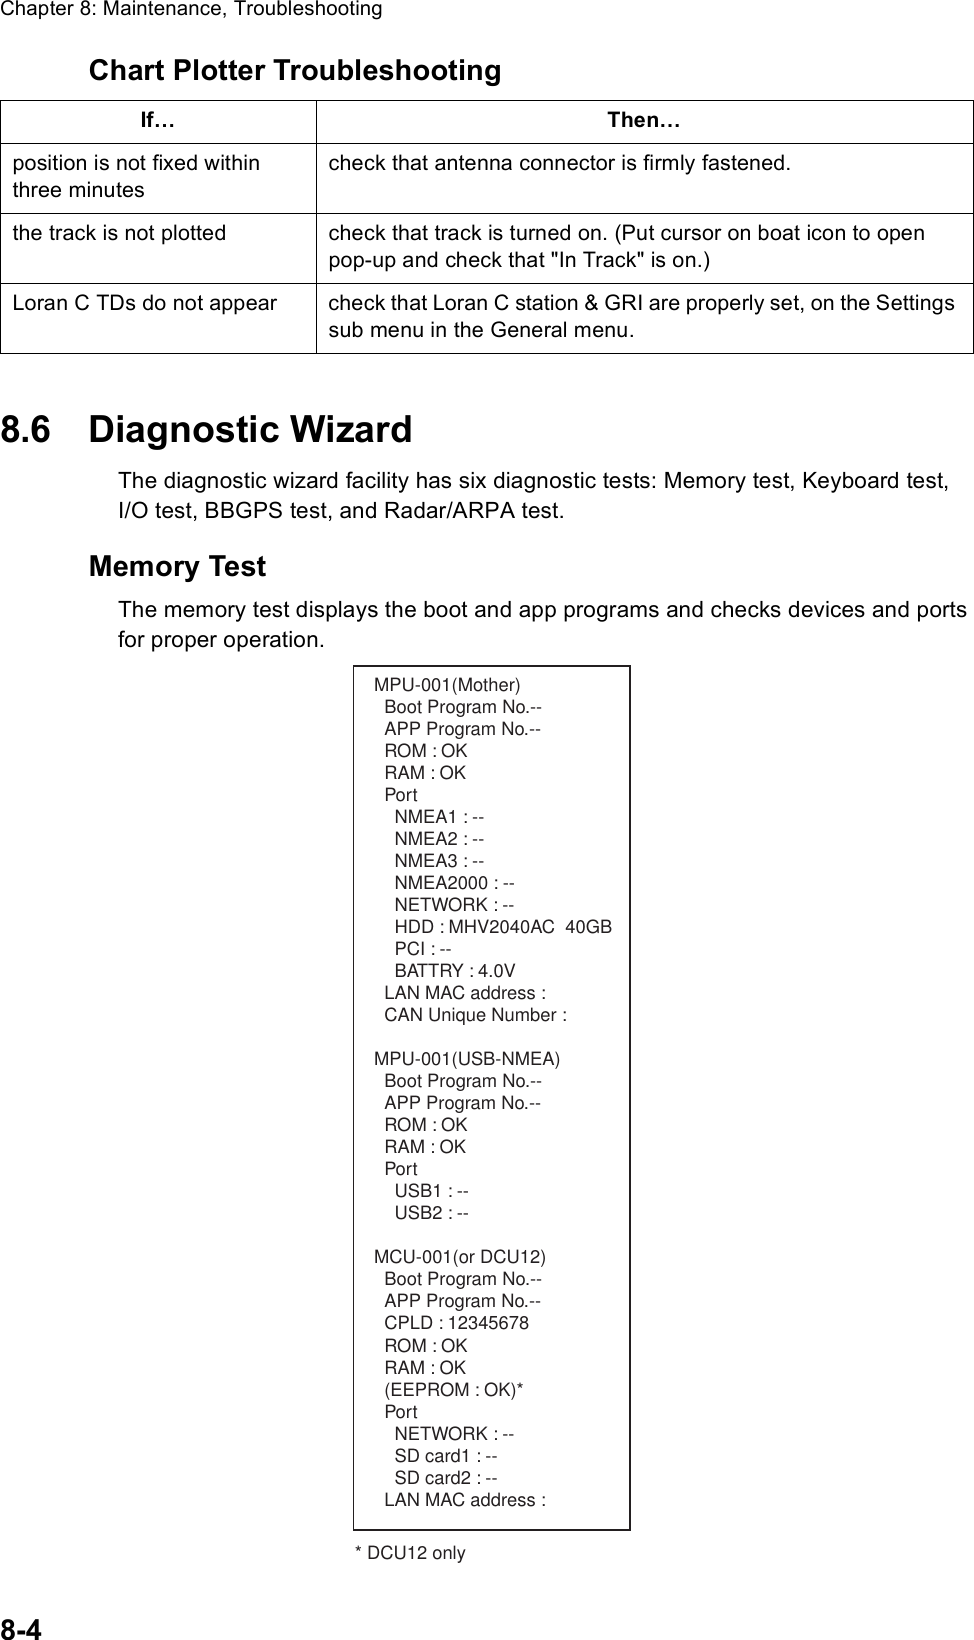 Chapter 8: Maintenance, Troubleshooting8-4Chart Plotter Troubleshooting8.6 Diagnostic WizardThe diagnostic wizard facility has six diagnostic tests: Memory test, Keyboard test,I/O test, BBGPS test, and Radar/ARPA test. Memory TestThe memory test displays the boot and app programs and checks devices and ports for proper operation.If… Then…position is not fixed within three minutescheck that antenna connector is firmly fastened.the track is not plotted check that track is turned on. (Put cursor on boat icon to open pop-up and check that &quot;In Track&quot; is on.)Loran C TDs do not appear check that Loran C station &amp; GRI are properly set, on the Settings sub menu in the General menu.MPU-001(Mother)  Boot Program No.--  APP Program No.--  ROM : OK  RAM : OK  Port    NMEA1 : --    NMEA2 : --    NMEA3 : --    NMEA2000 : --    NETWORK : --    HDD : MHV2040AC  40GB    PCI : --    BATTRY : 4.0V  LAN MAC address :   CAN Unique Number : MPU-001(USB-NMEA)  Boot Program No.--  APP Program No.--  ROM : OK   RAM : OK   Port    USB1 : --      USB2 : -- MCU-001(or DCU12)  Boot Program No.--  APP Program No.--  CPLD : 12345678  ROM : OK  RAM : OK  (EEPROM : OK)*  Port    NETWORK : --    SD card1 : --    SD card2 : --  LAN MAC address :* DCU12 only